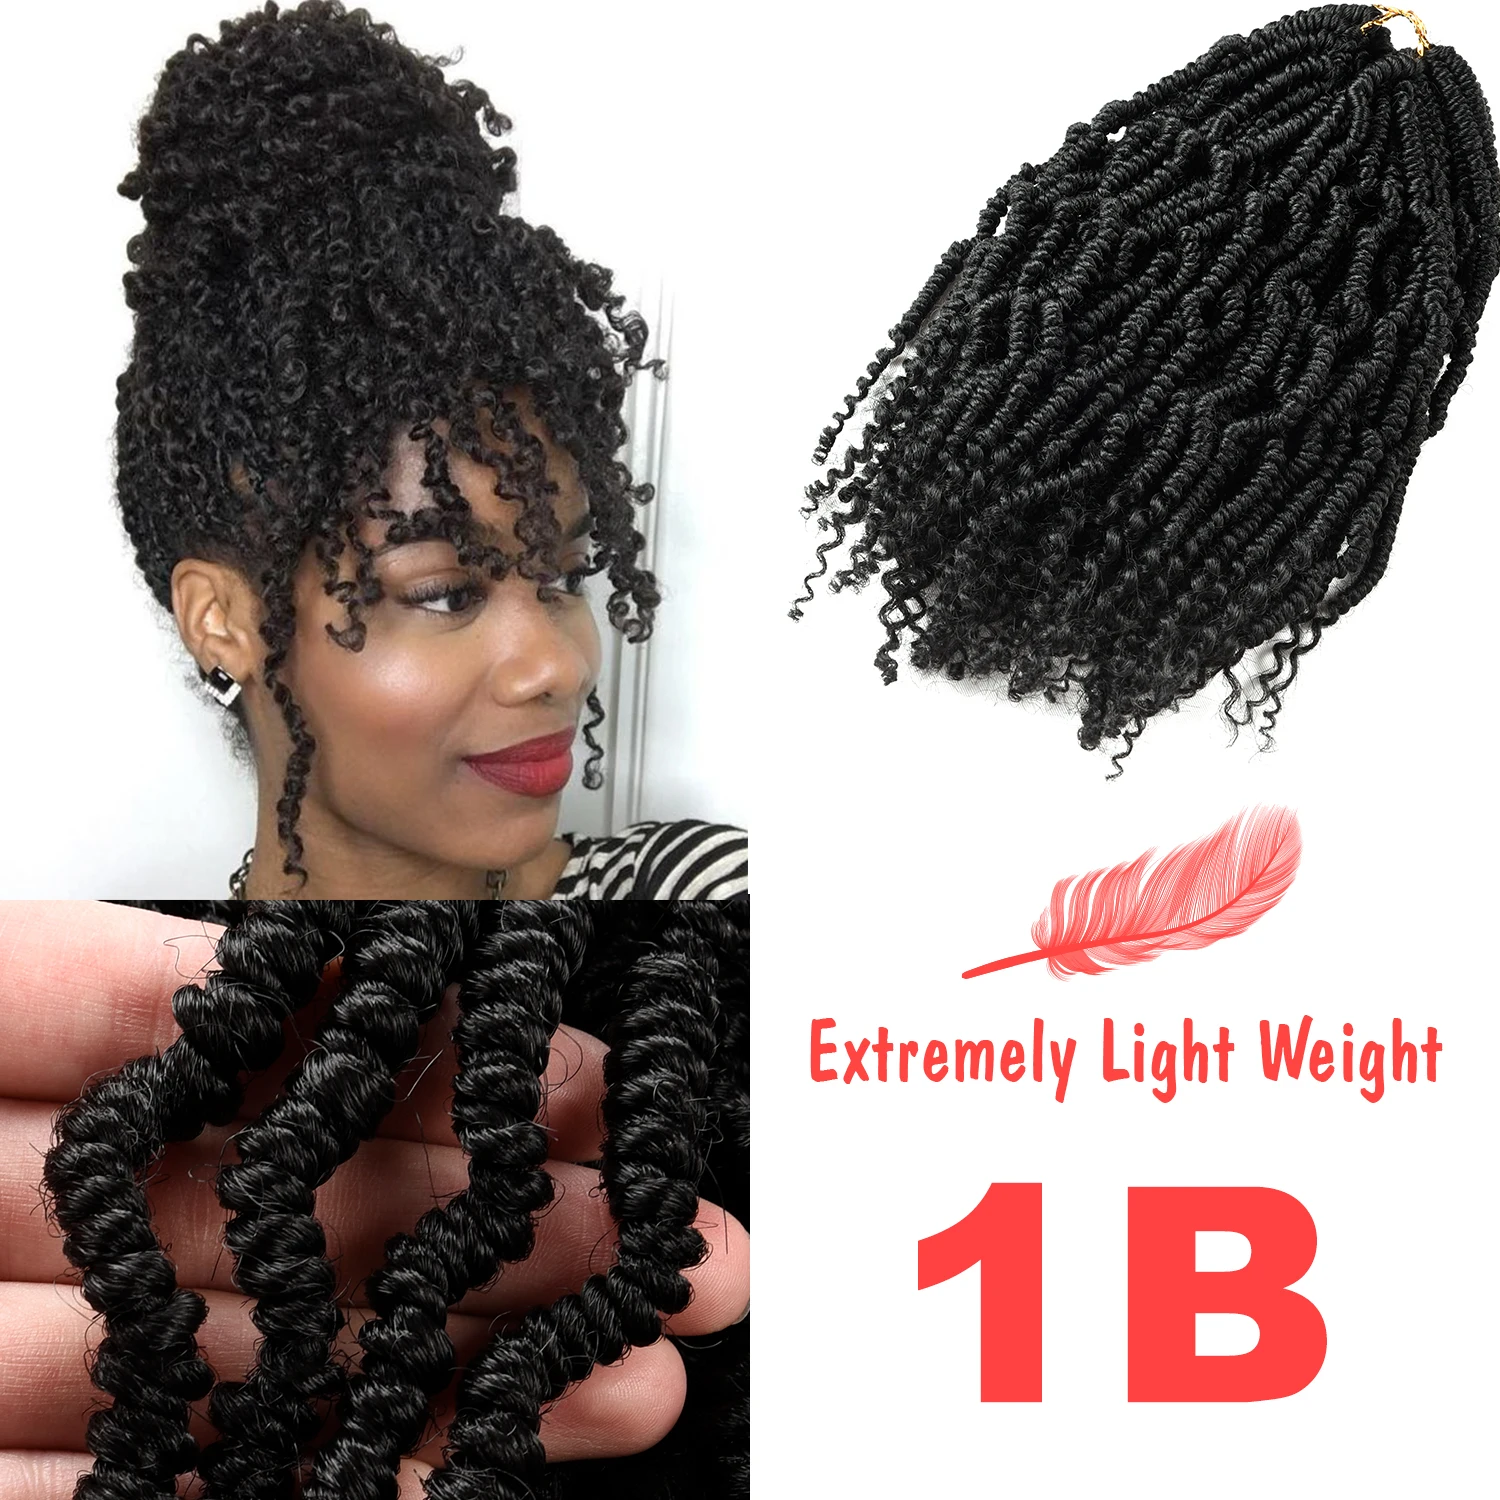 

12/18inch 24strands/pack Spring Crochet Water Wave Hair Extensions Synthetic Braiding Hair Passion Twist Crochet Braids Hair, #1/#1b#/#2/#4/#27/#30/#33/#613/#t-27/#t1-30/#t1/bug